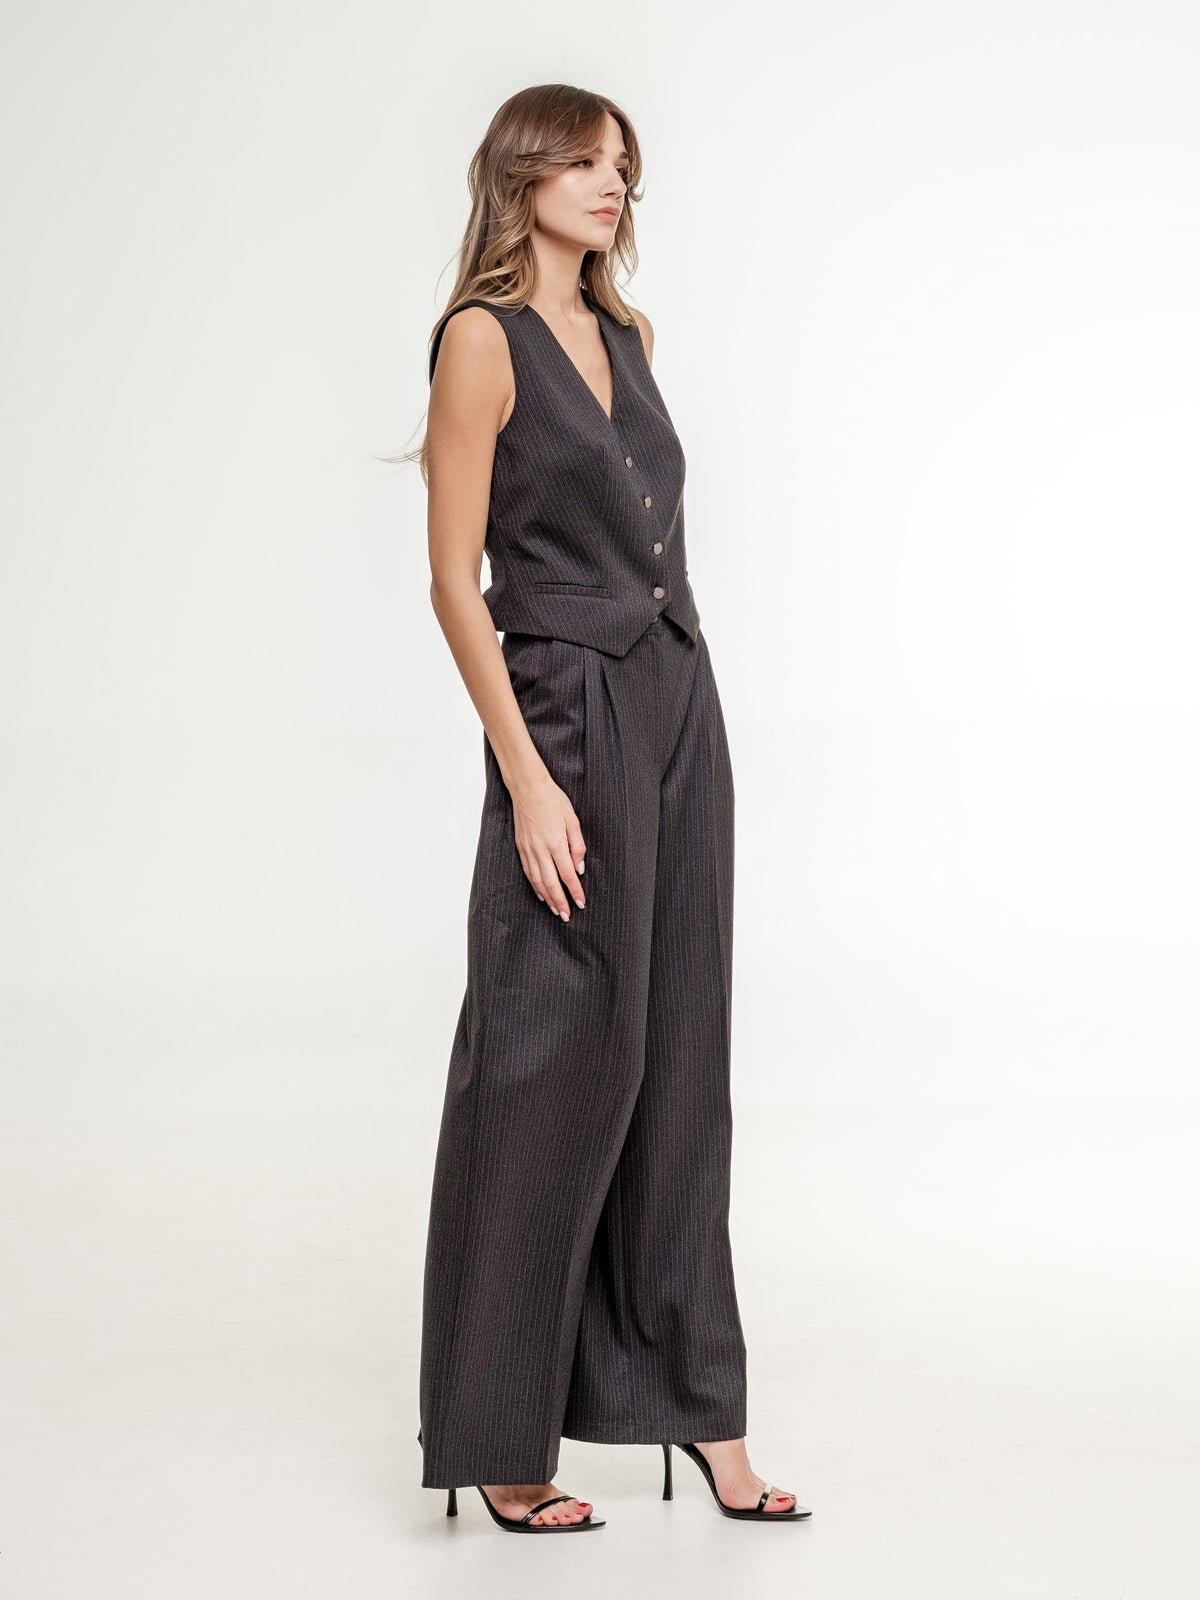 woman 2 piece set dark grey vest and wide trousers view from the side 